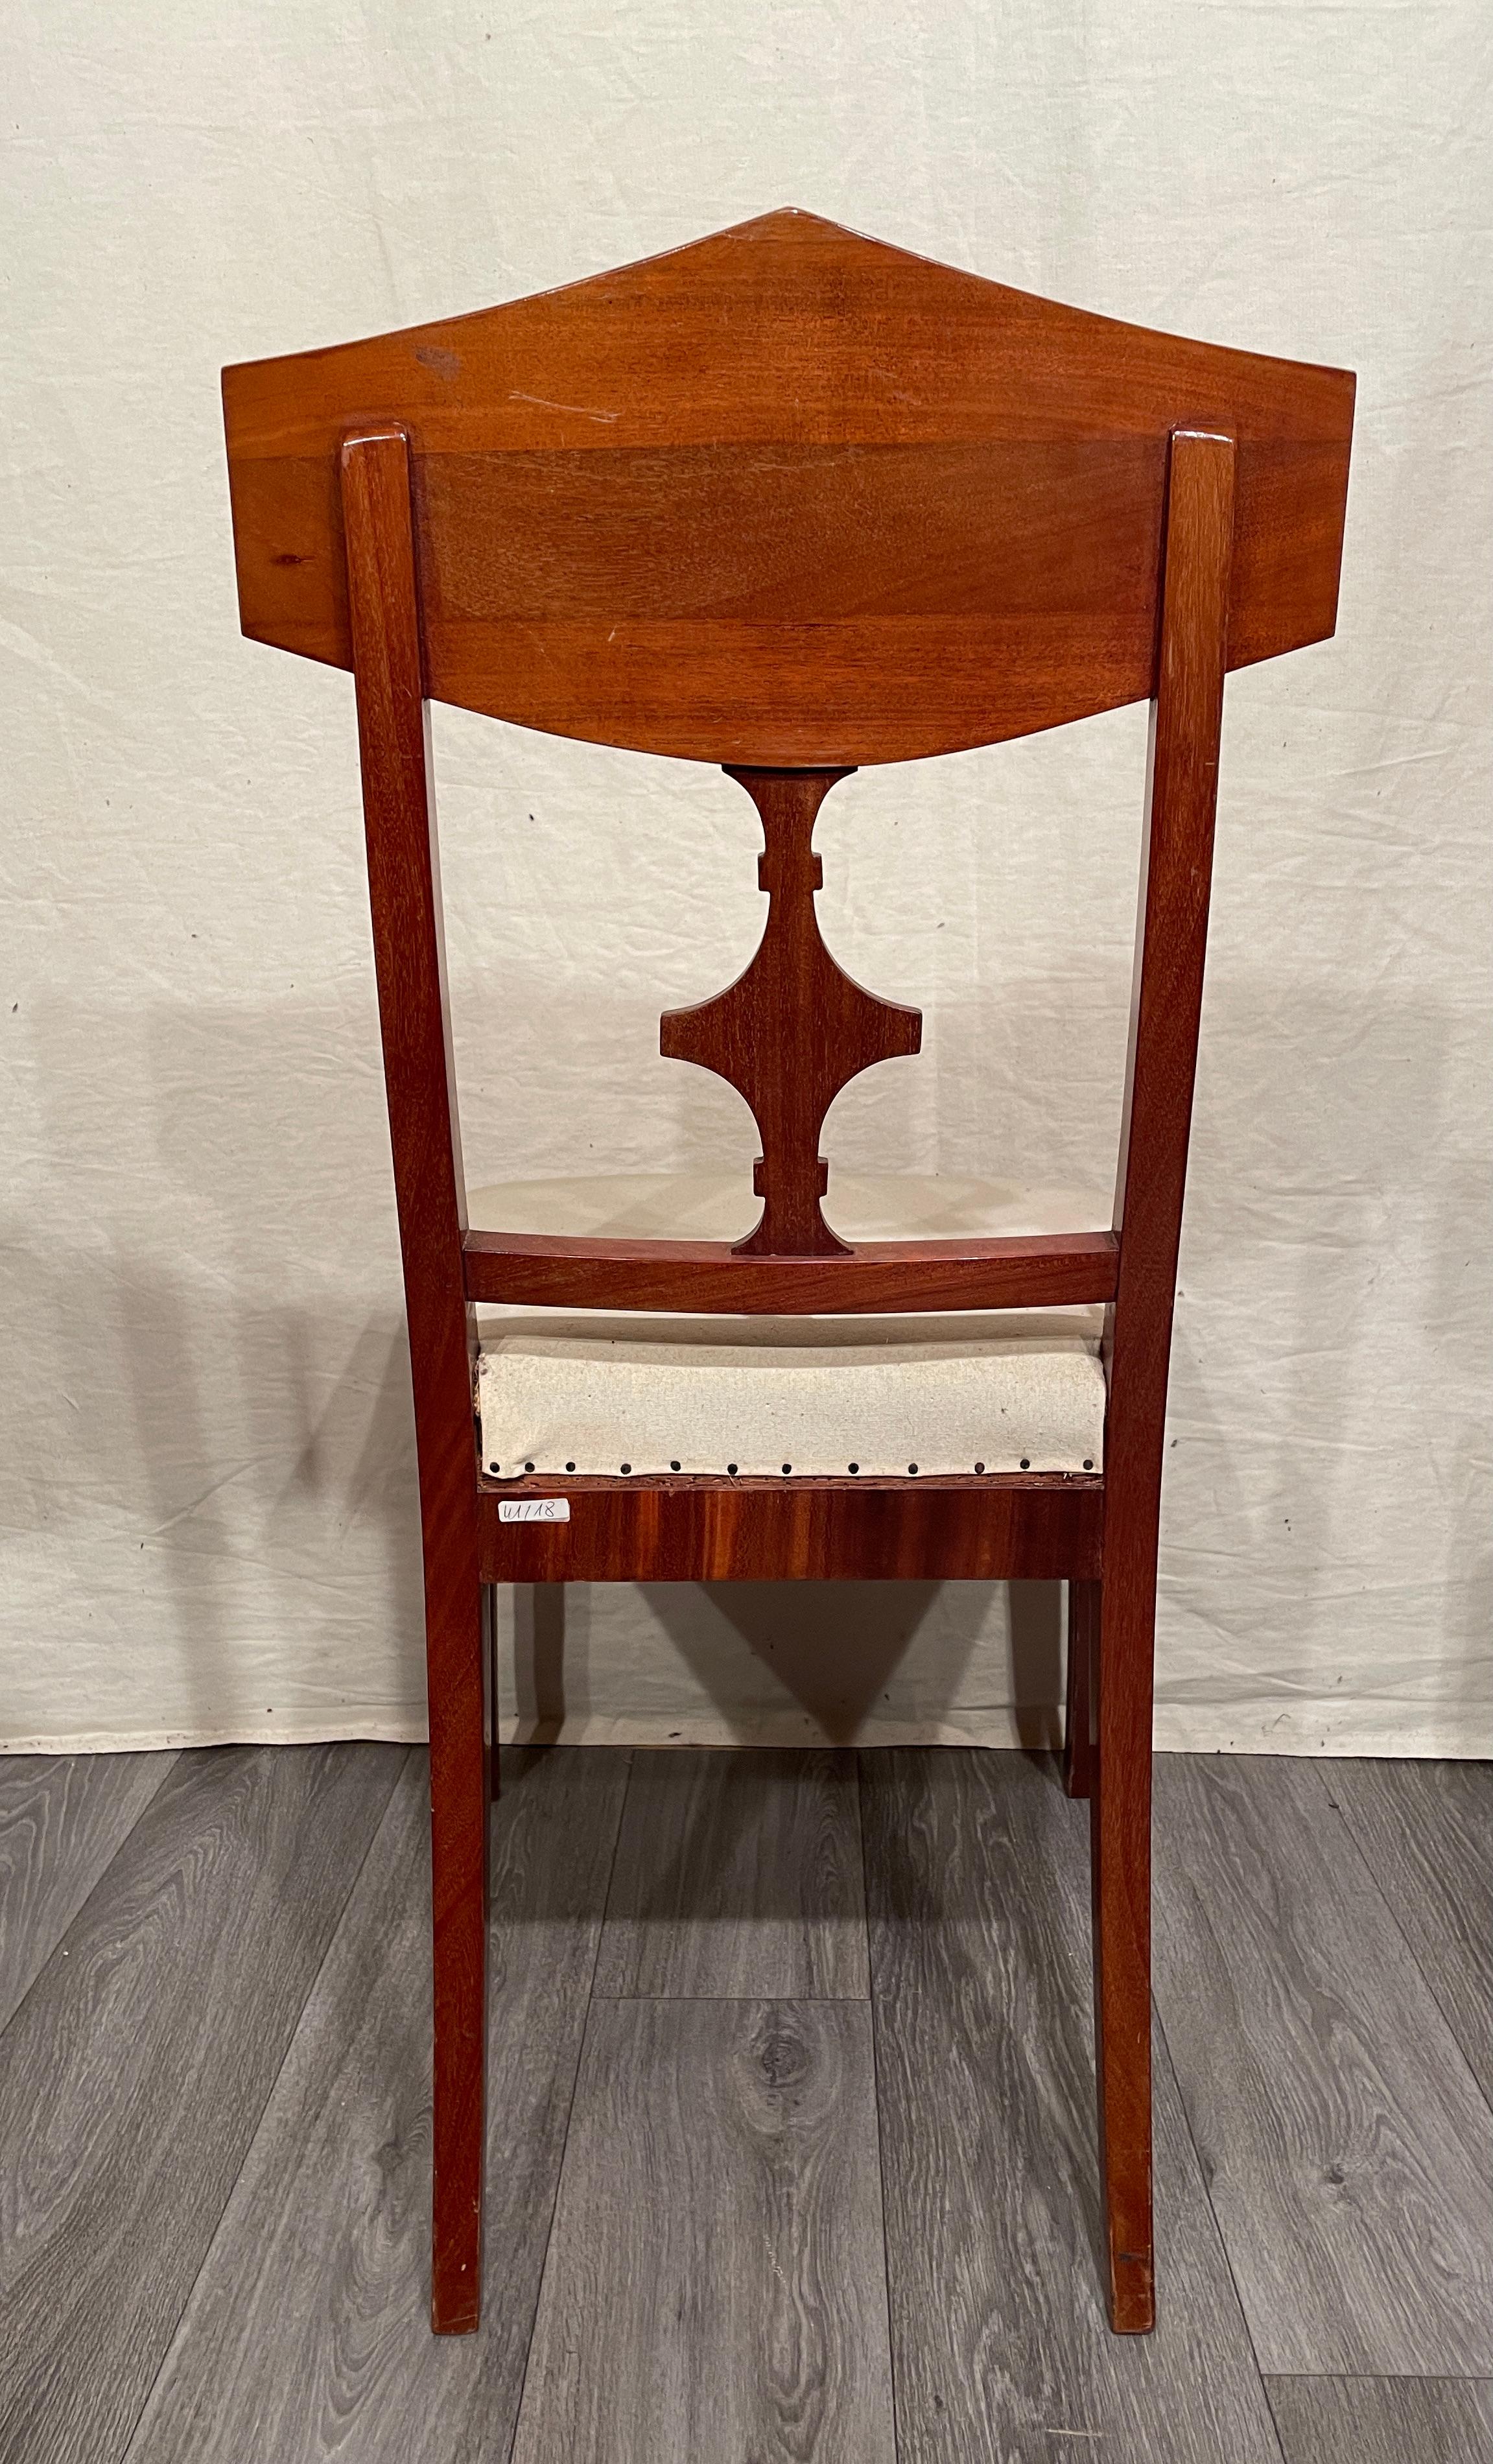 Early 19th Century Set of Four Biedermeier Chairs, Northern Germany 1820